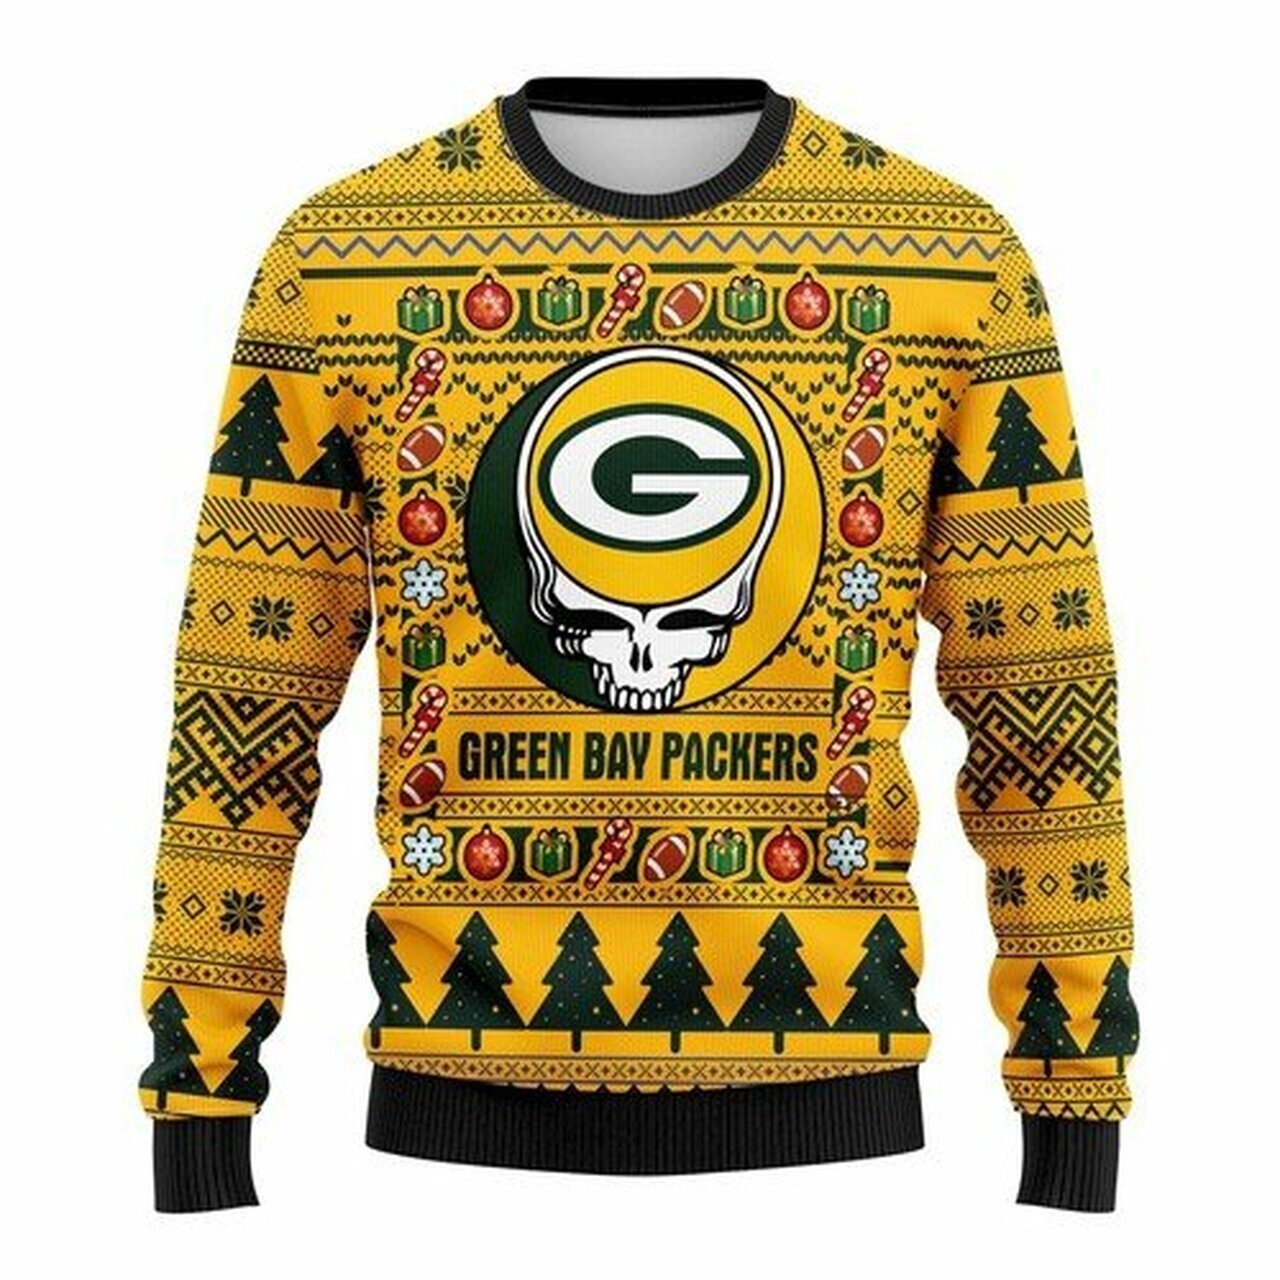 NFL Green Bay Packers Grateful Dead ugly christmas sweater